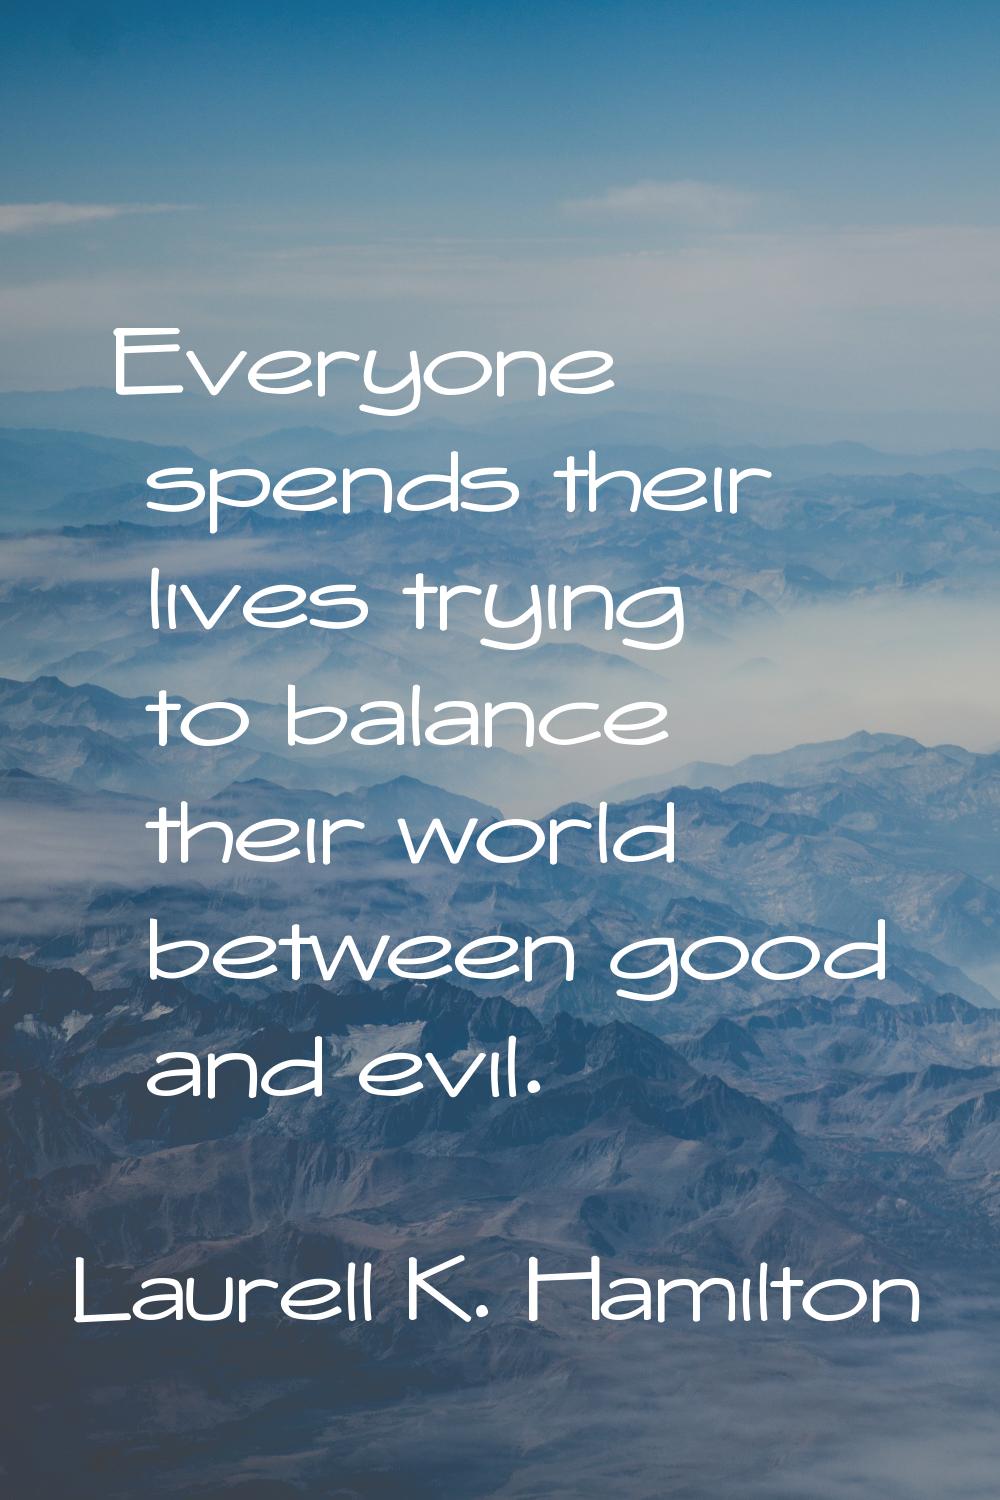 Everyone spends their lives trying to balance their world between good and evil.